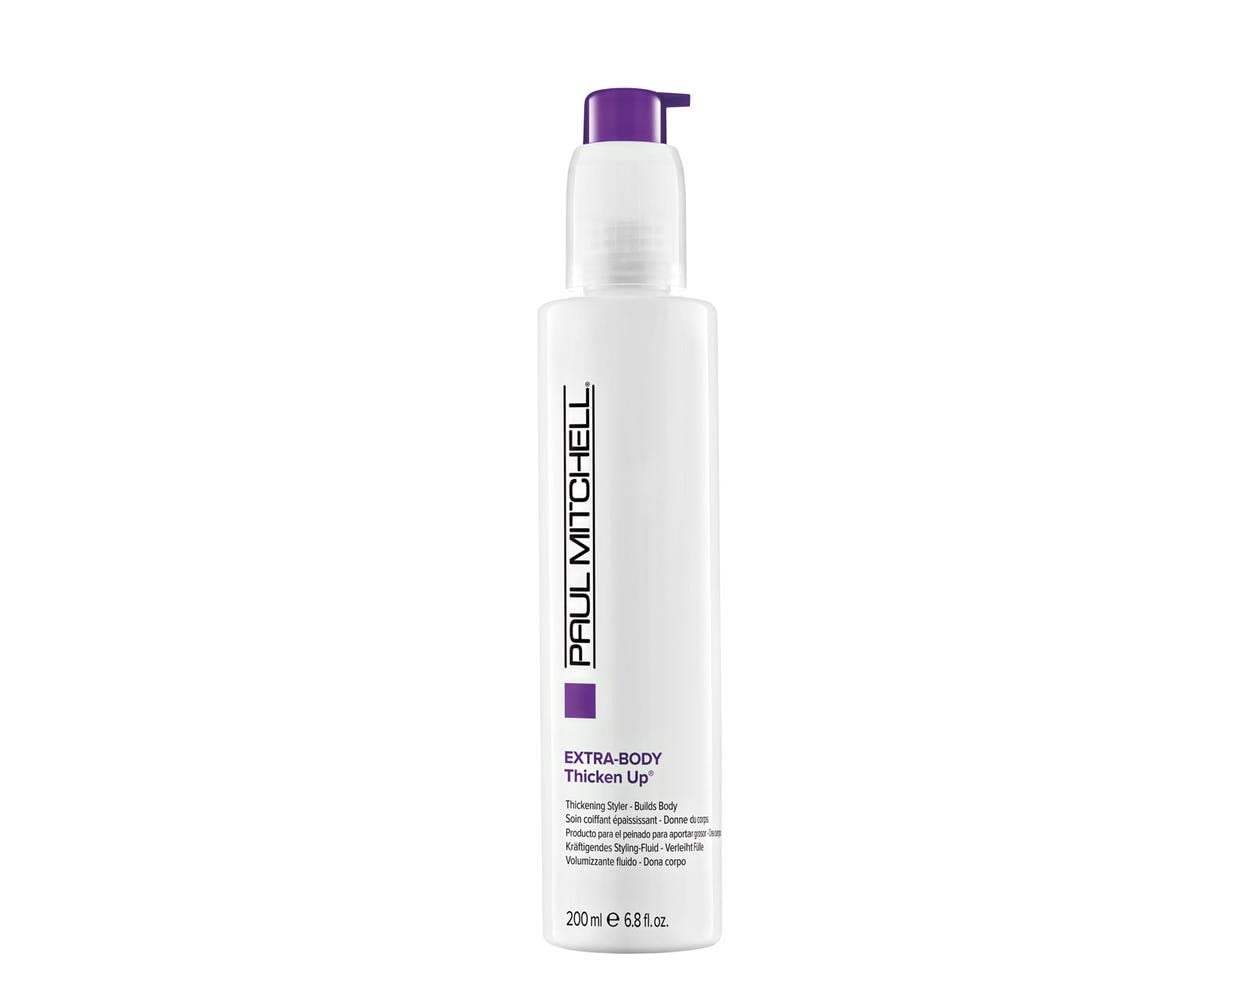 Paul Mitchell Extra-Body Thicken Up - Thickening Hair Fluid for More Shine and Volume, Professional Hair Styling Ideal for Fine Hair, 200 ml